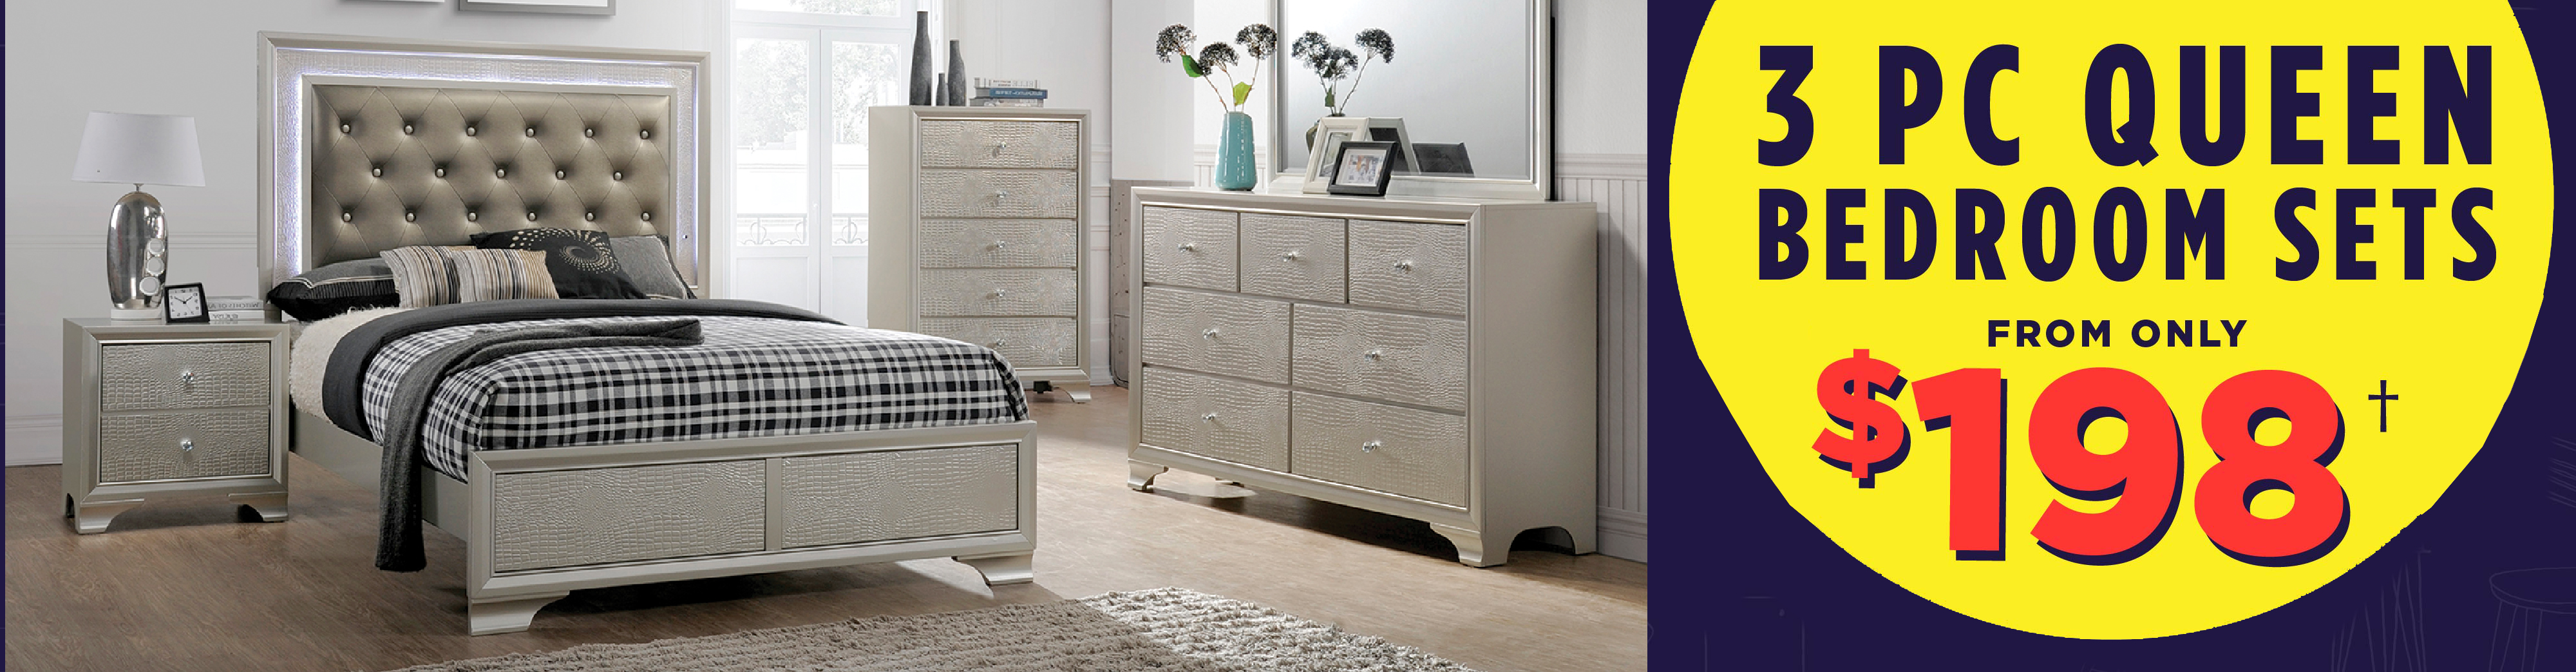 3-pc. Queen Bedroom Sets from only $198!